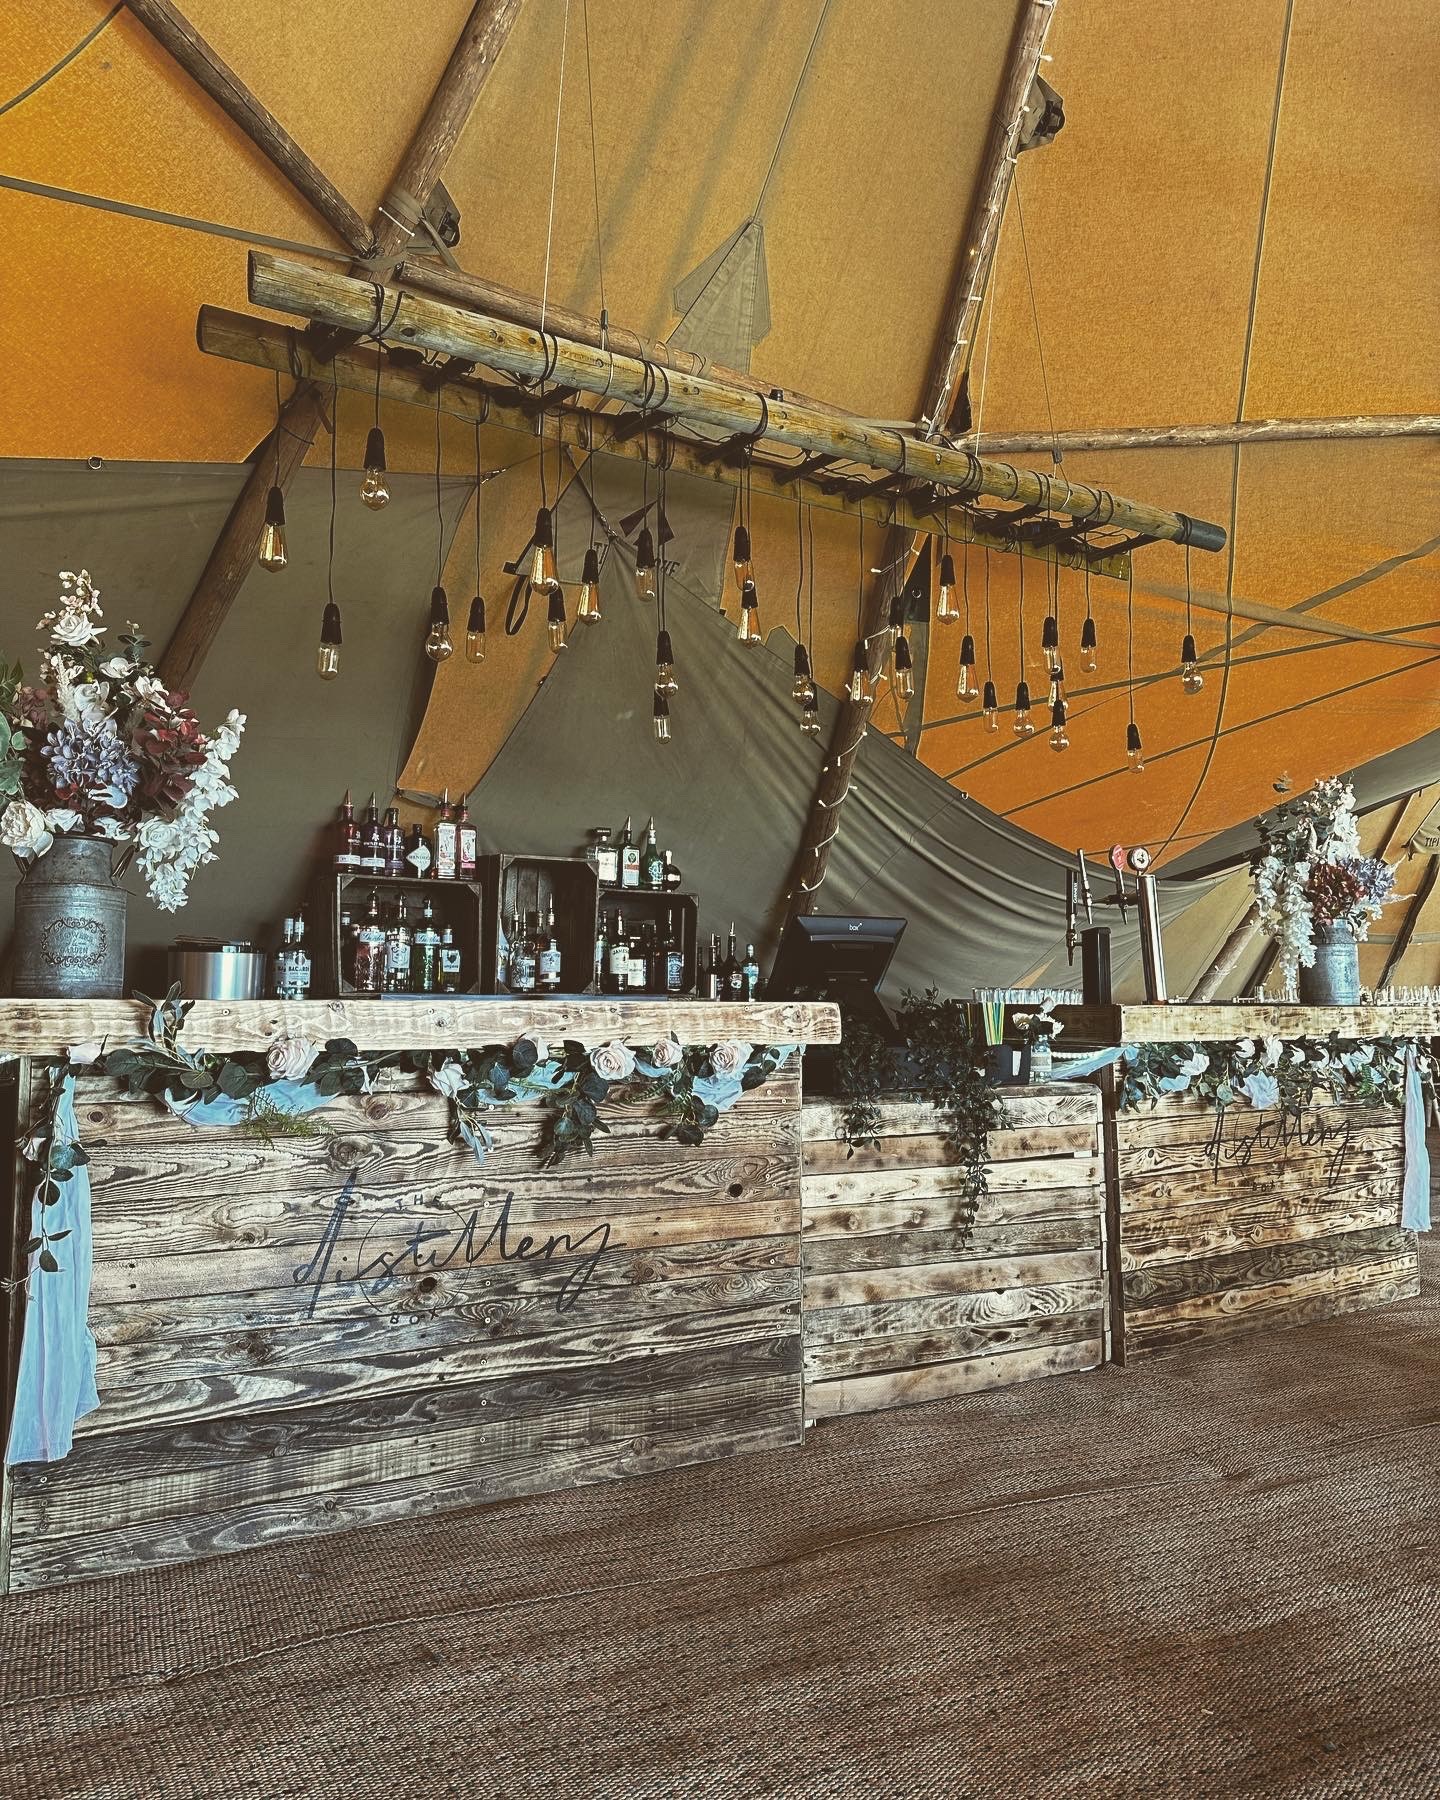 An image of our rustic bar